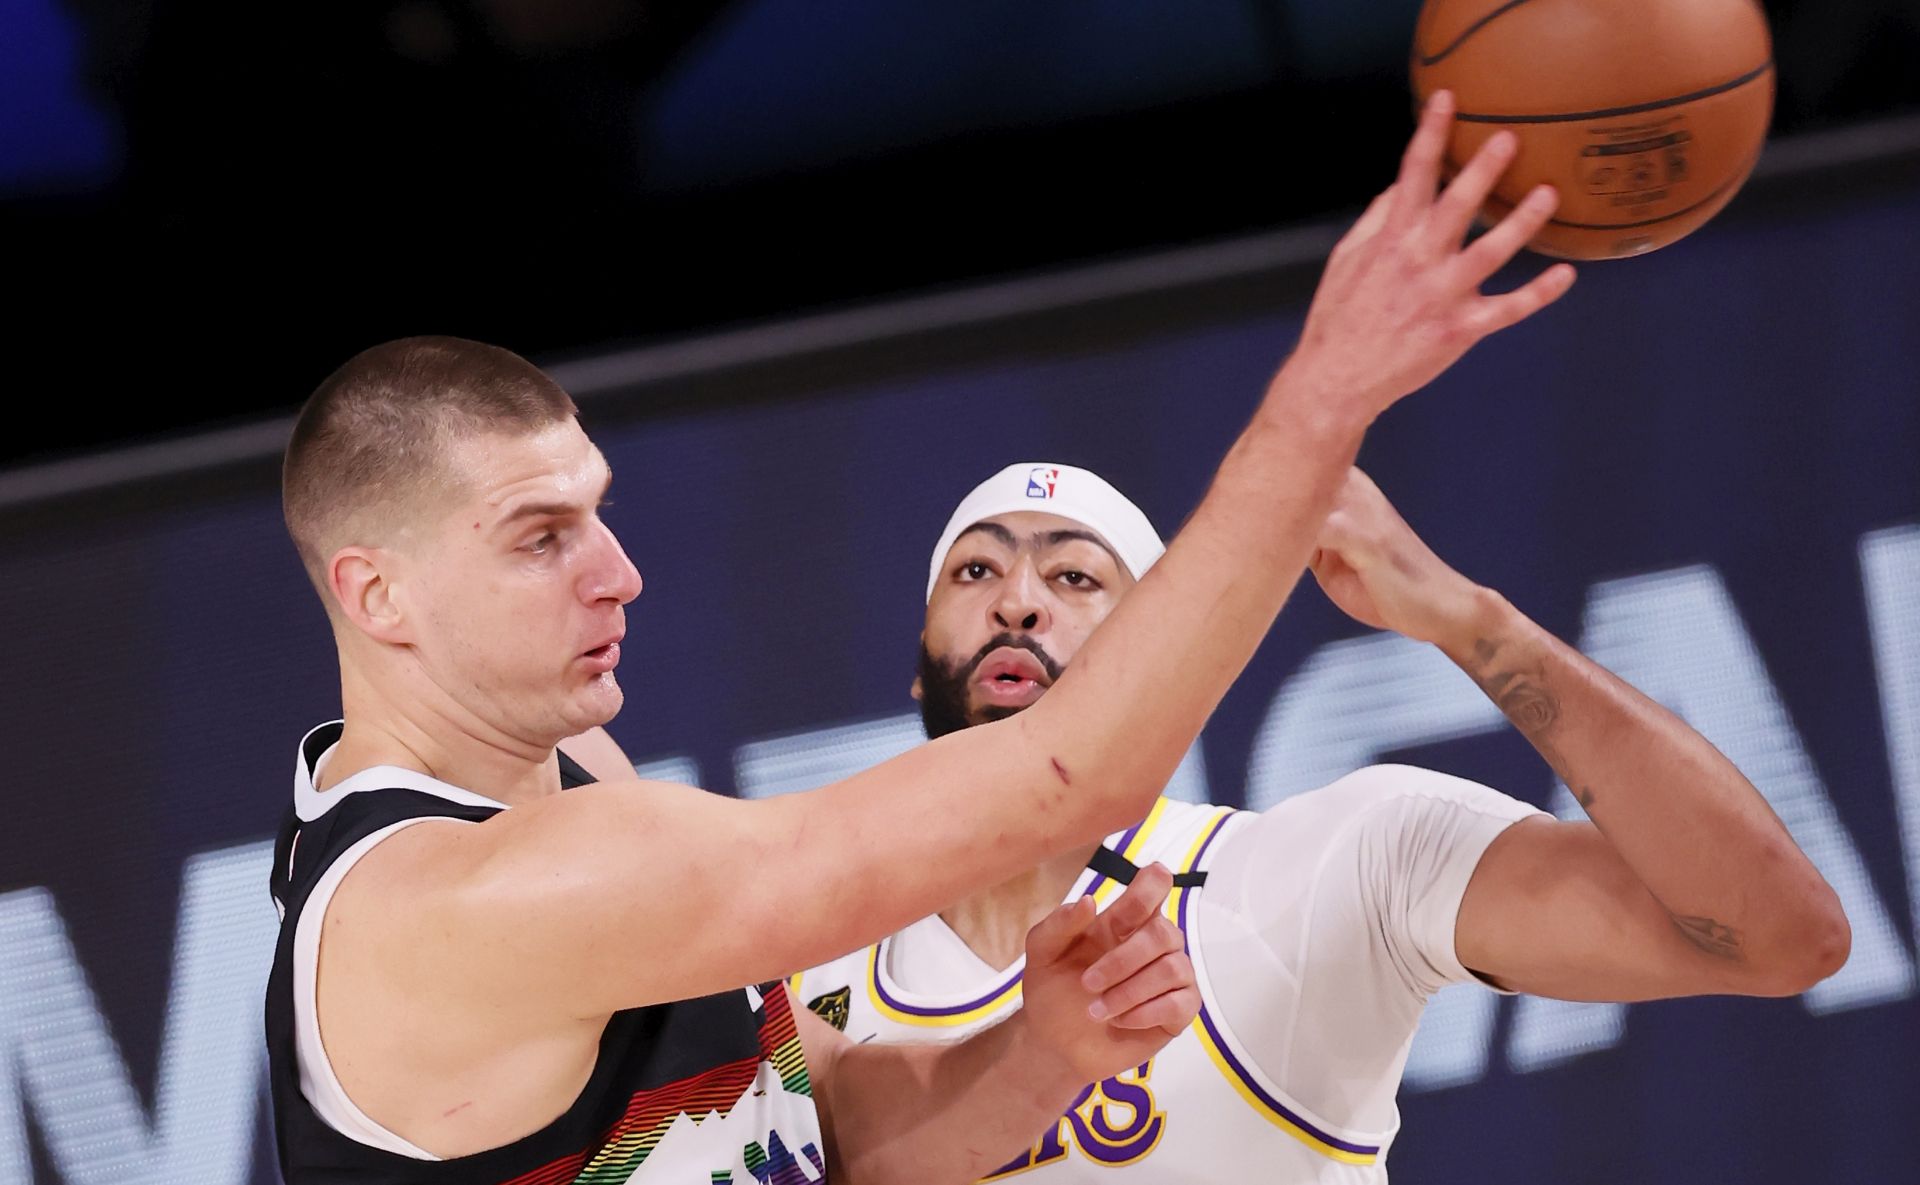 epa08689541 Denver Nuggets center Nikola Jokic (L) makes a pass as Los Angeles Lakers forward Anthony Davis (R) defends during the first half of the NBA basketball Western Conference finals playoff game three between the Los Angeles Lakers and the Denver Nuggets at the ESPN Wide World of Sports Complex in Kissimmee, Florida, USA, 22 September 2020.  EPA/ERIK S. LESSER SHUTTERSTOCK OUT